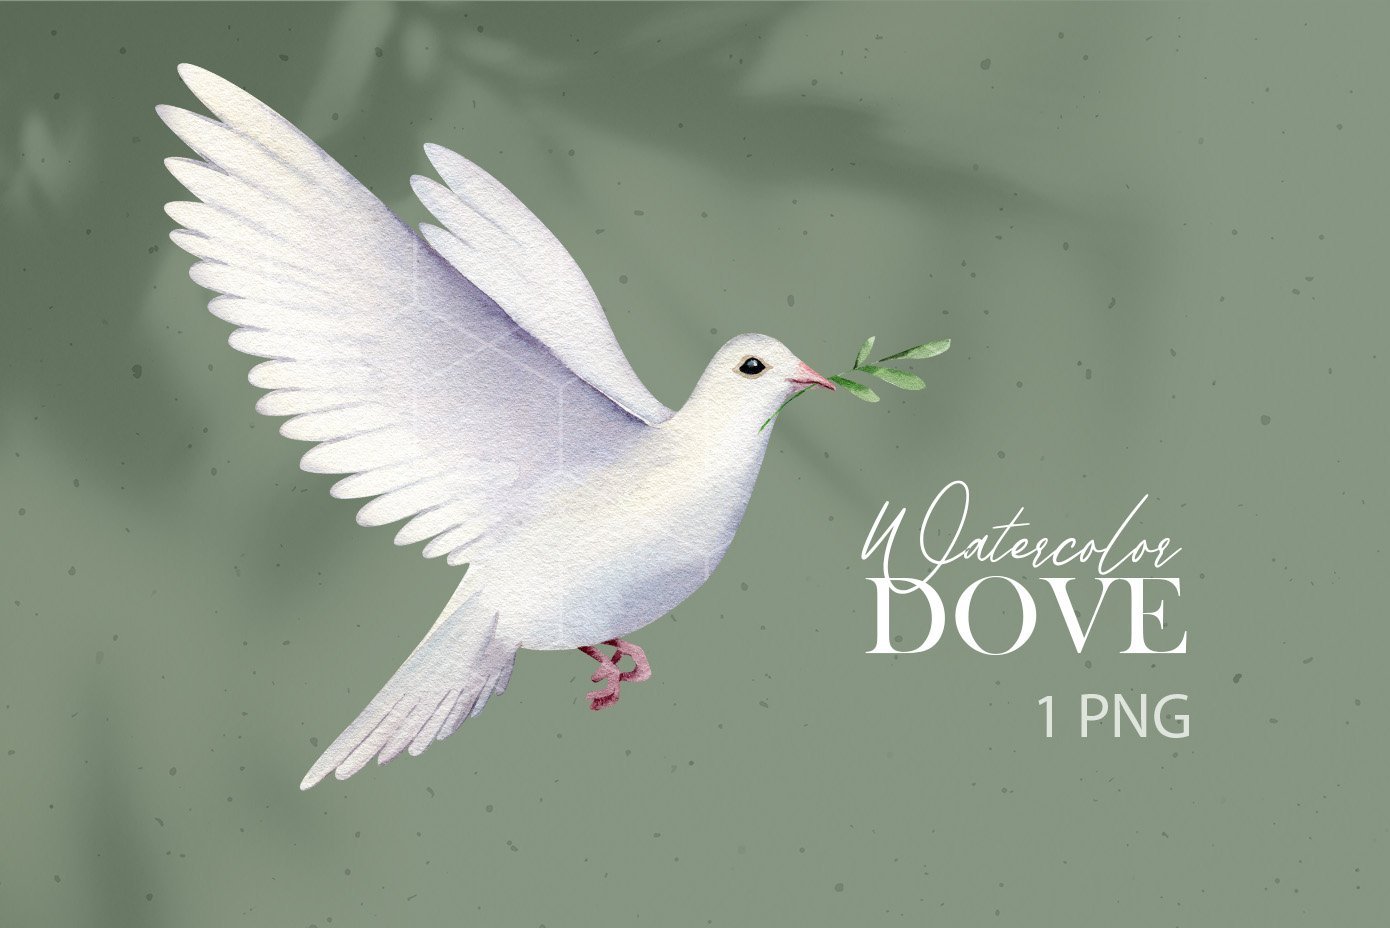 White dove on a green background.